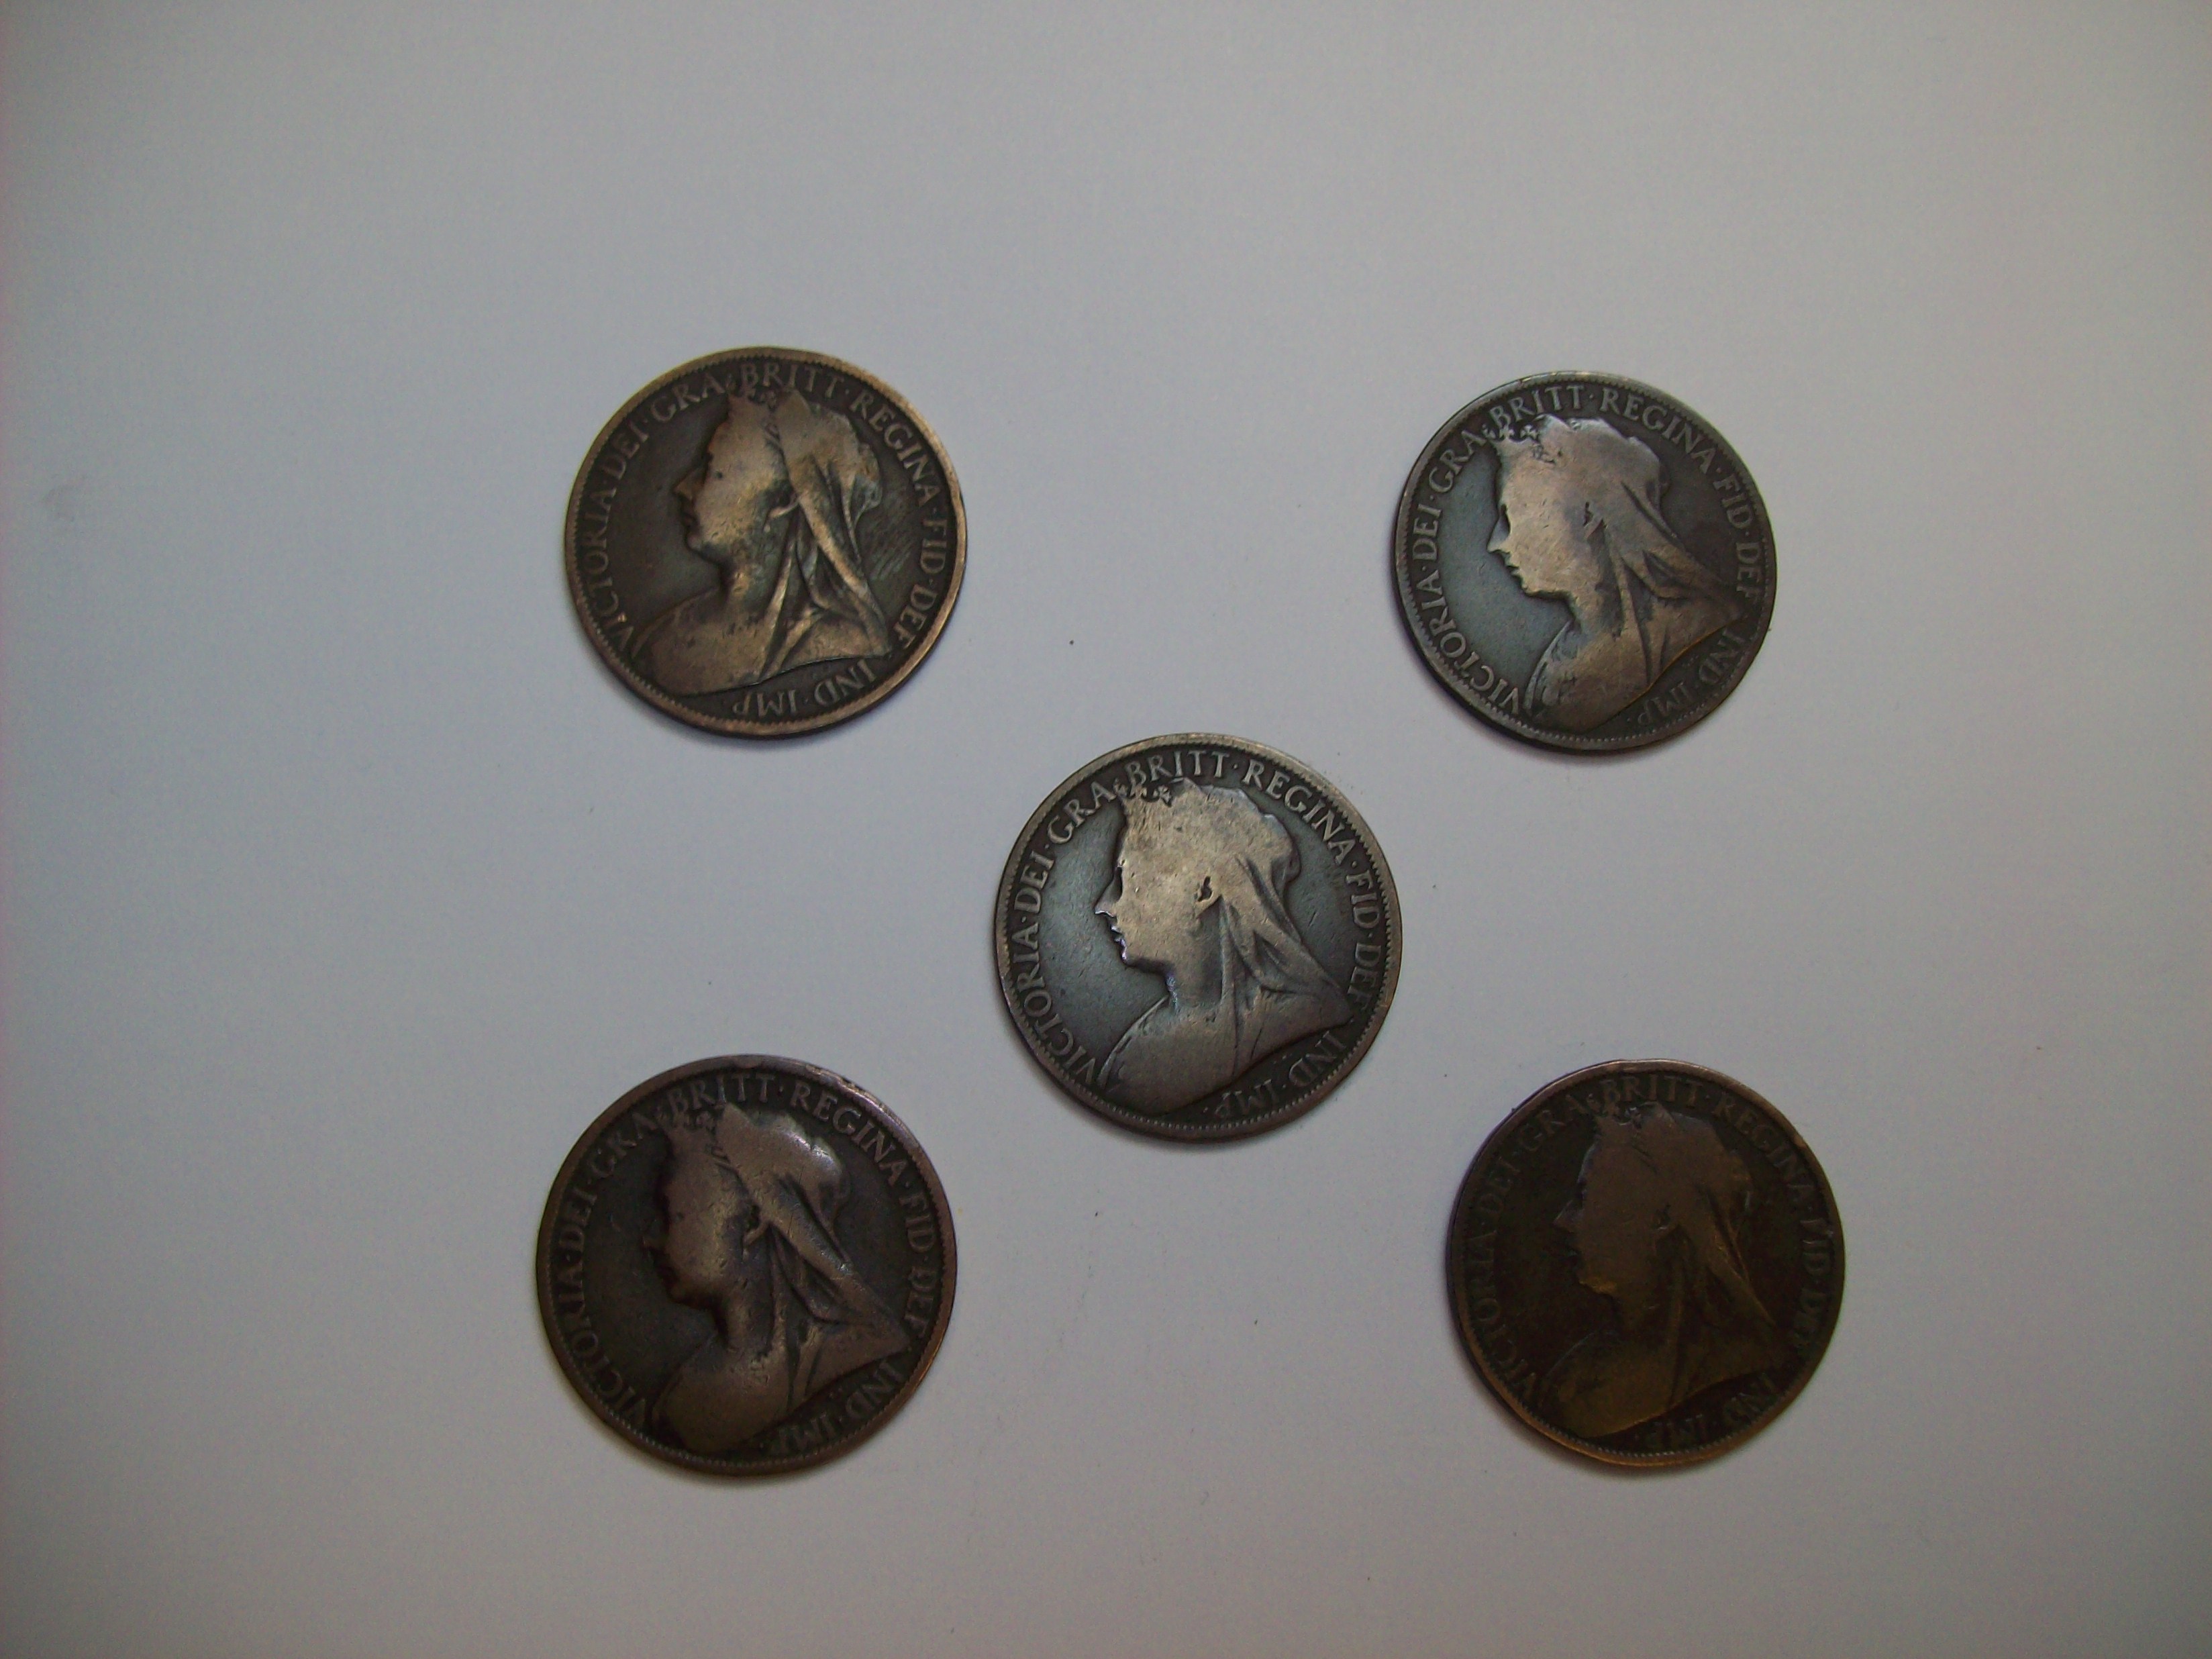 Expanded Victorian Penny Shell plus 4 matching coins